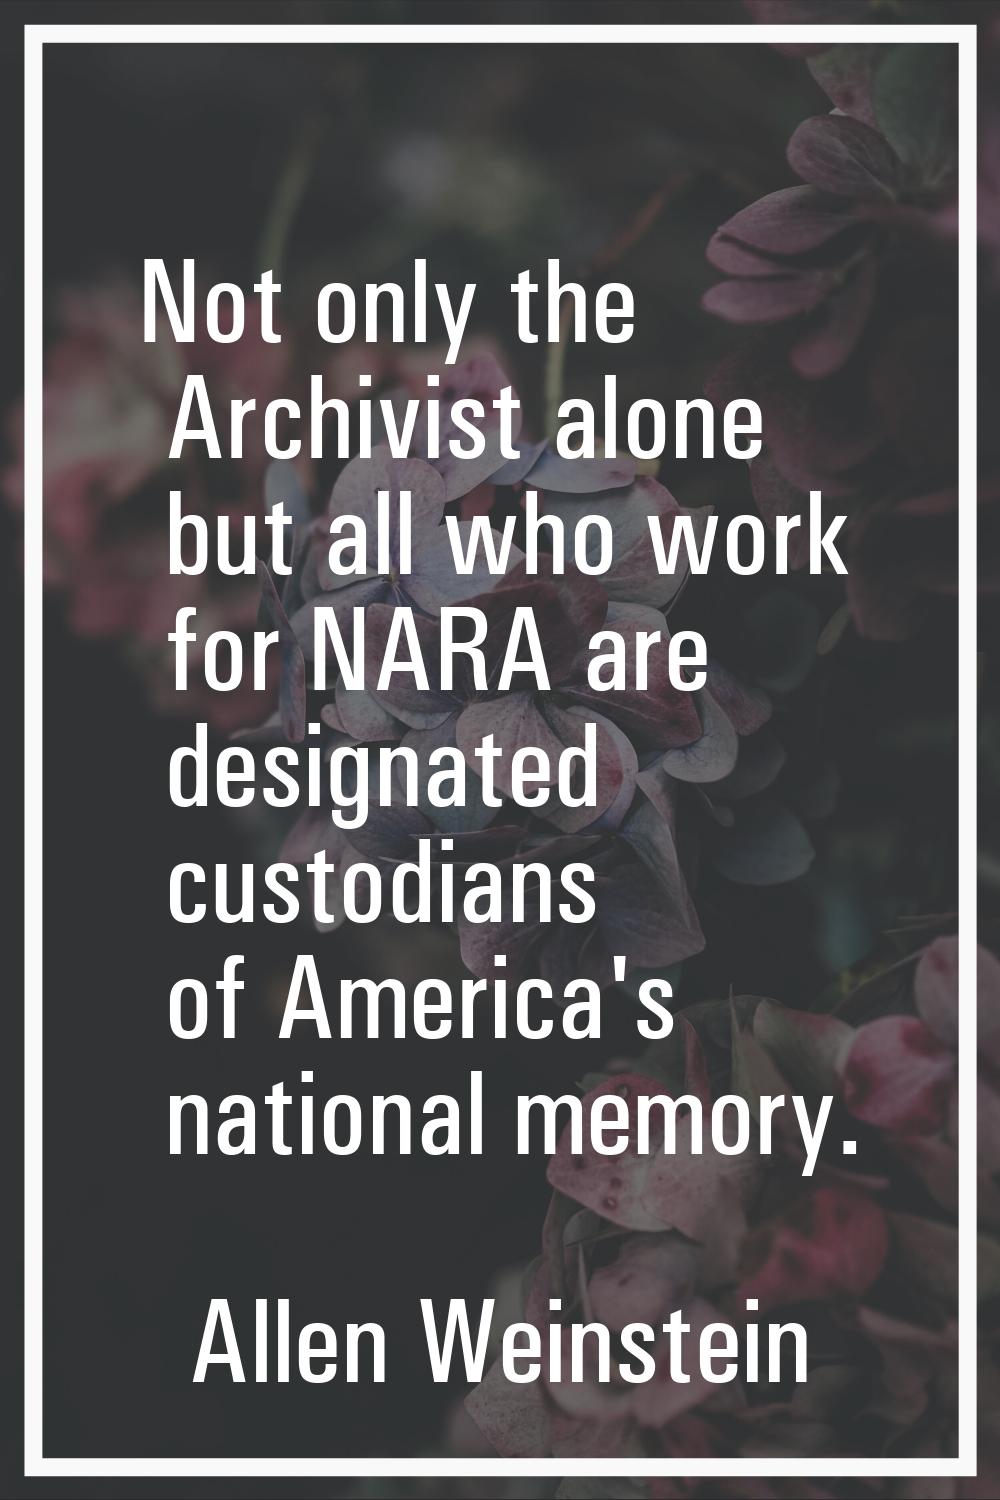 Not only the Archivist alone but all who work for NARA are designated custodians of America's natio